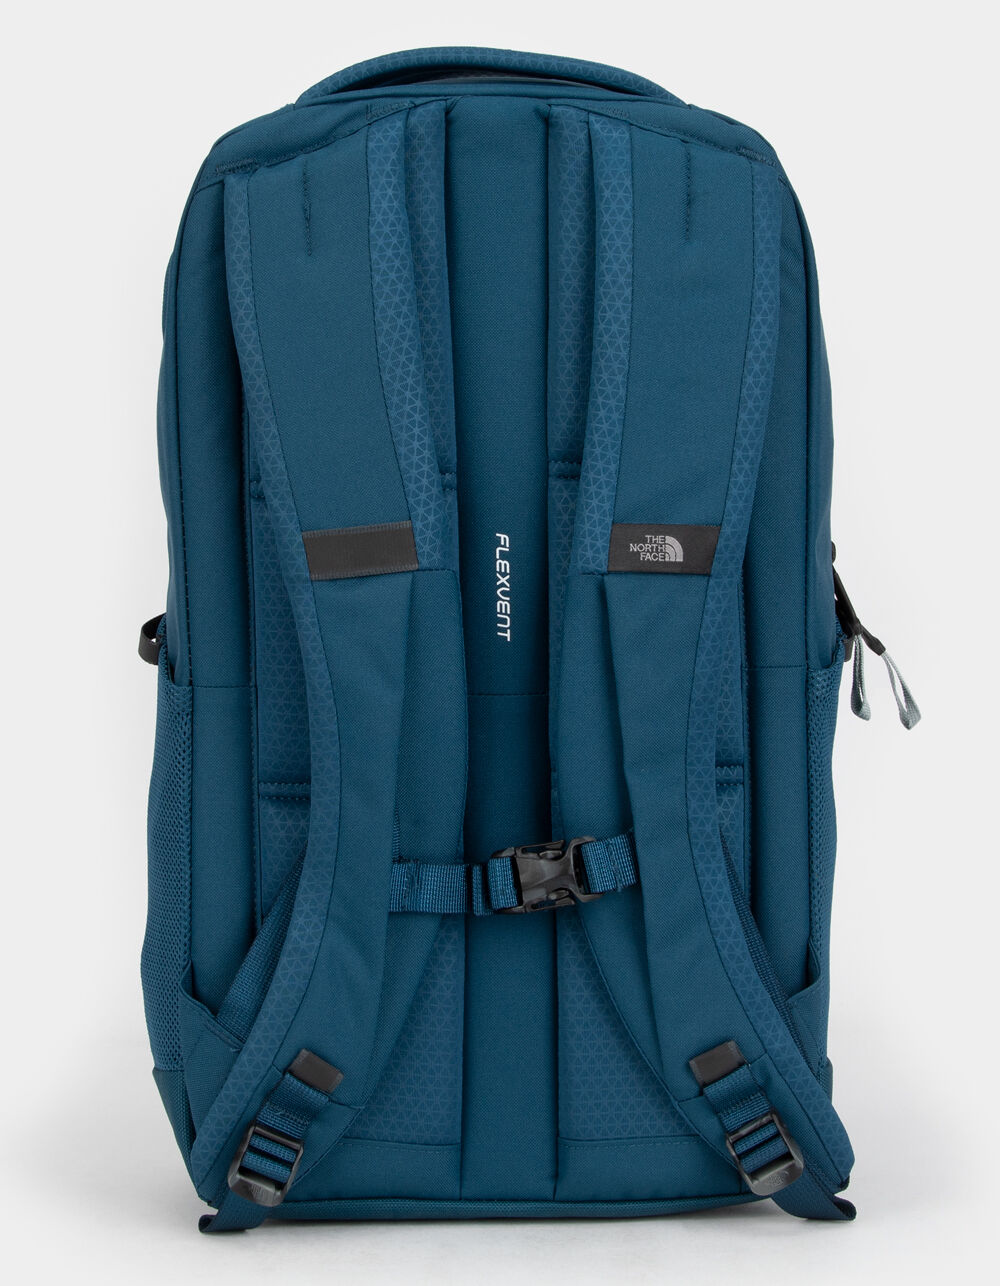 THE NORTH FACE Jester Navy Backpack - BLUE | Tillys